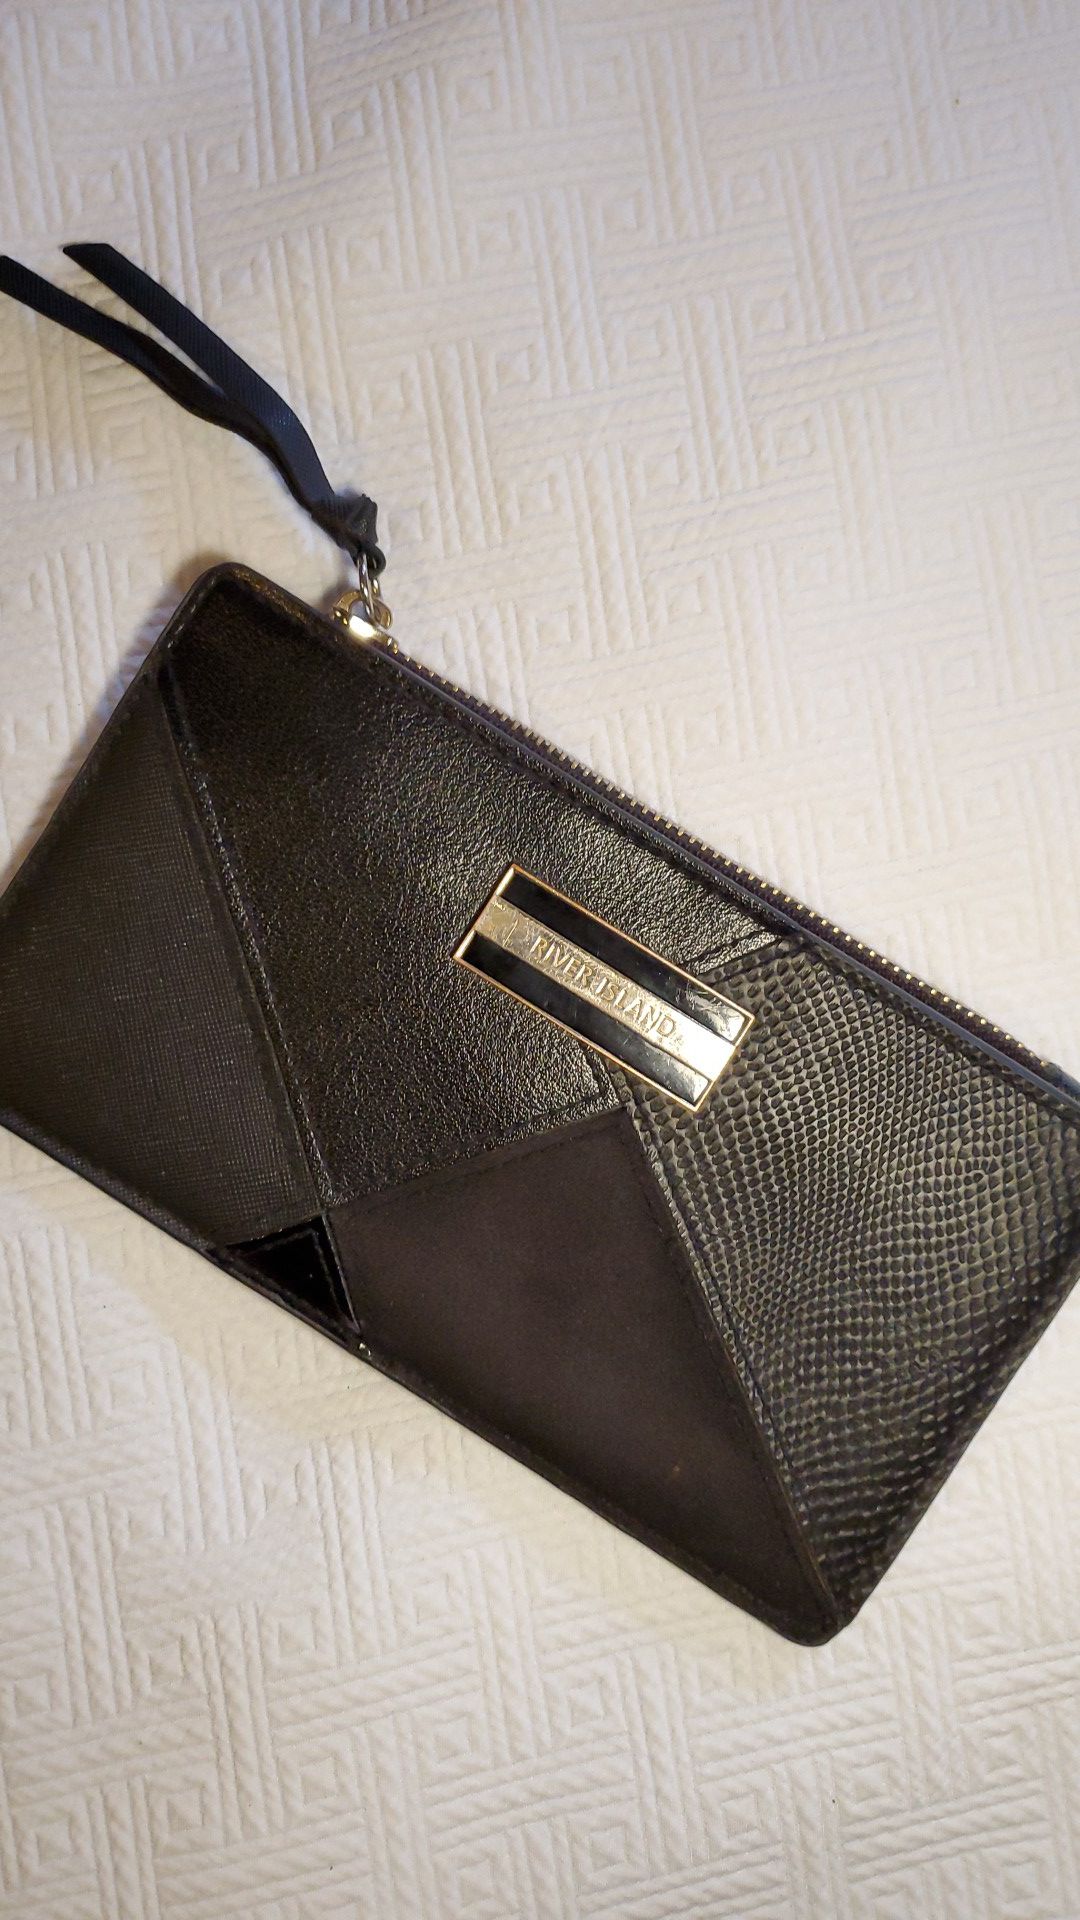 BLACK LEATHER & SUEDE RIVER ISLAND WALLET/CLUTCH